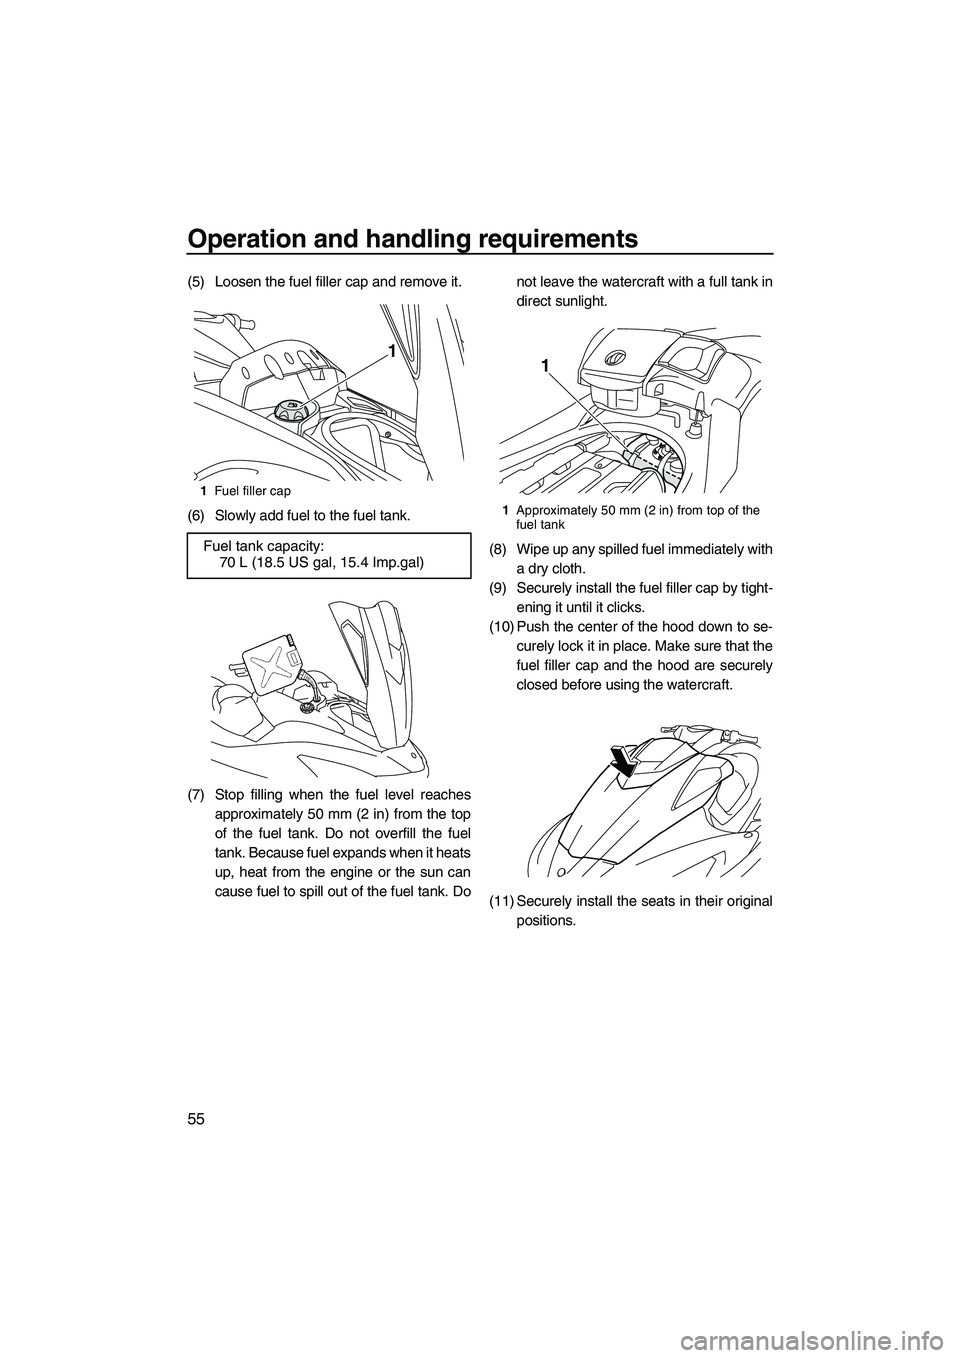 YAMAHA FX SHO 2010  Owners Manual Operation and handling requirements
55
(5) Loosen the fuel filler cap and remove it.
(6) Slowly add fuel to the fuel tank.
(7) Stop filling when the fuel level reaches
approximately 50 mm (2 in) from 